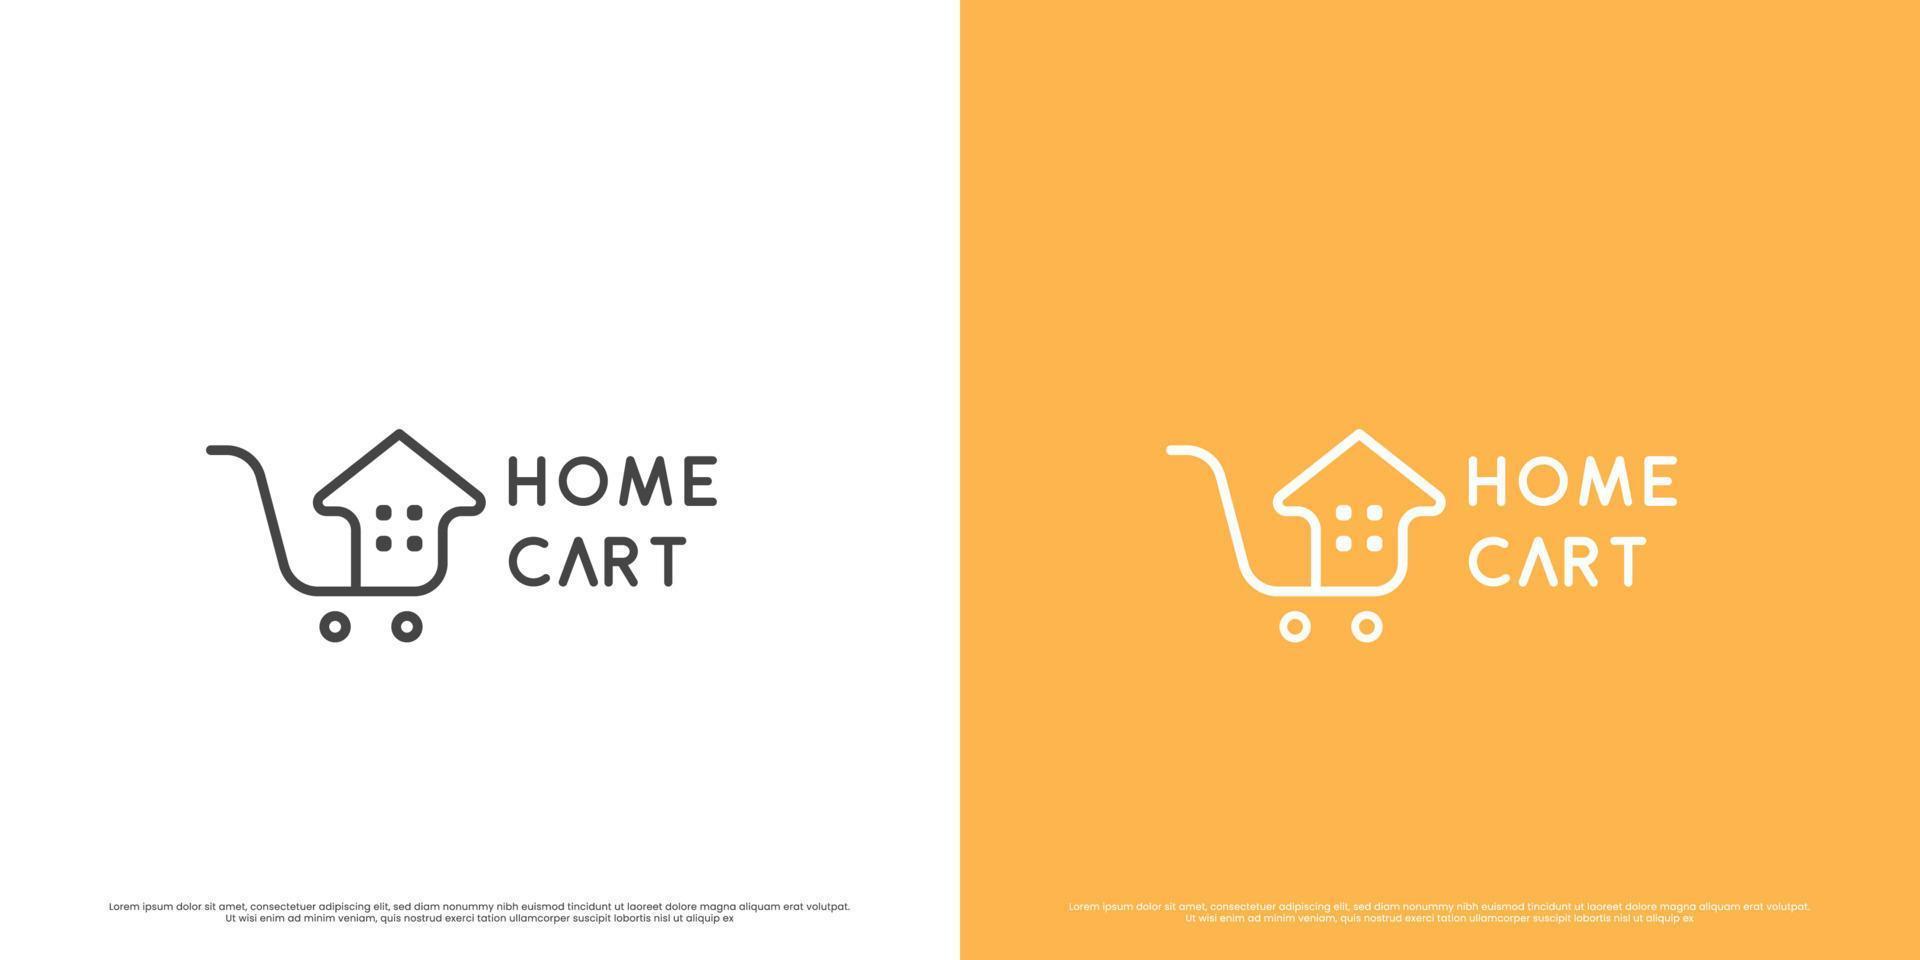 Home cart house sale logo design illustration. Simple minimalist line art silhouette of pushcart residential house. Creative idea for a residence icon for a boarding house. home house app website icon vector